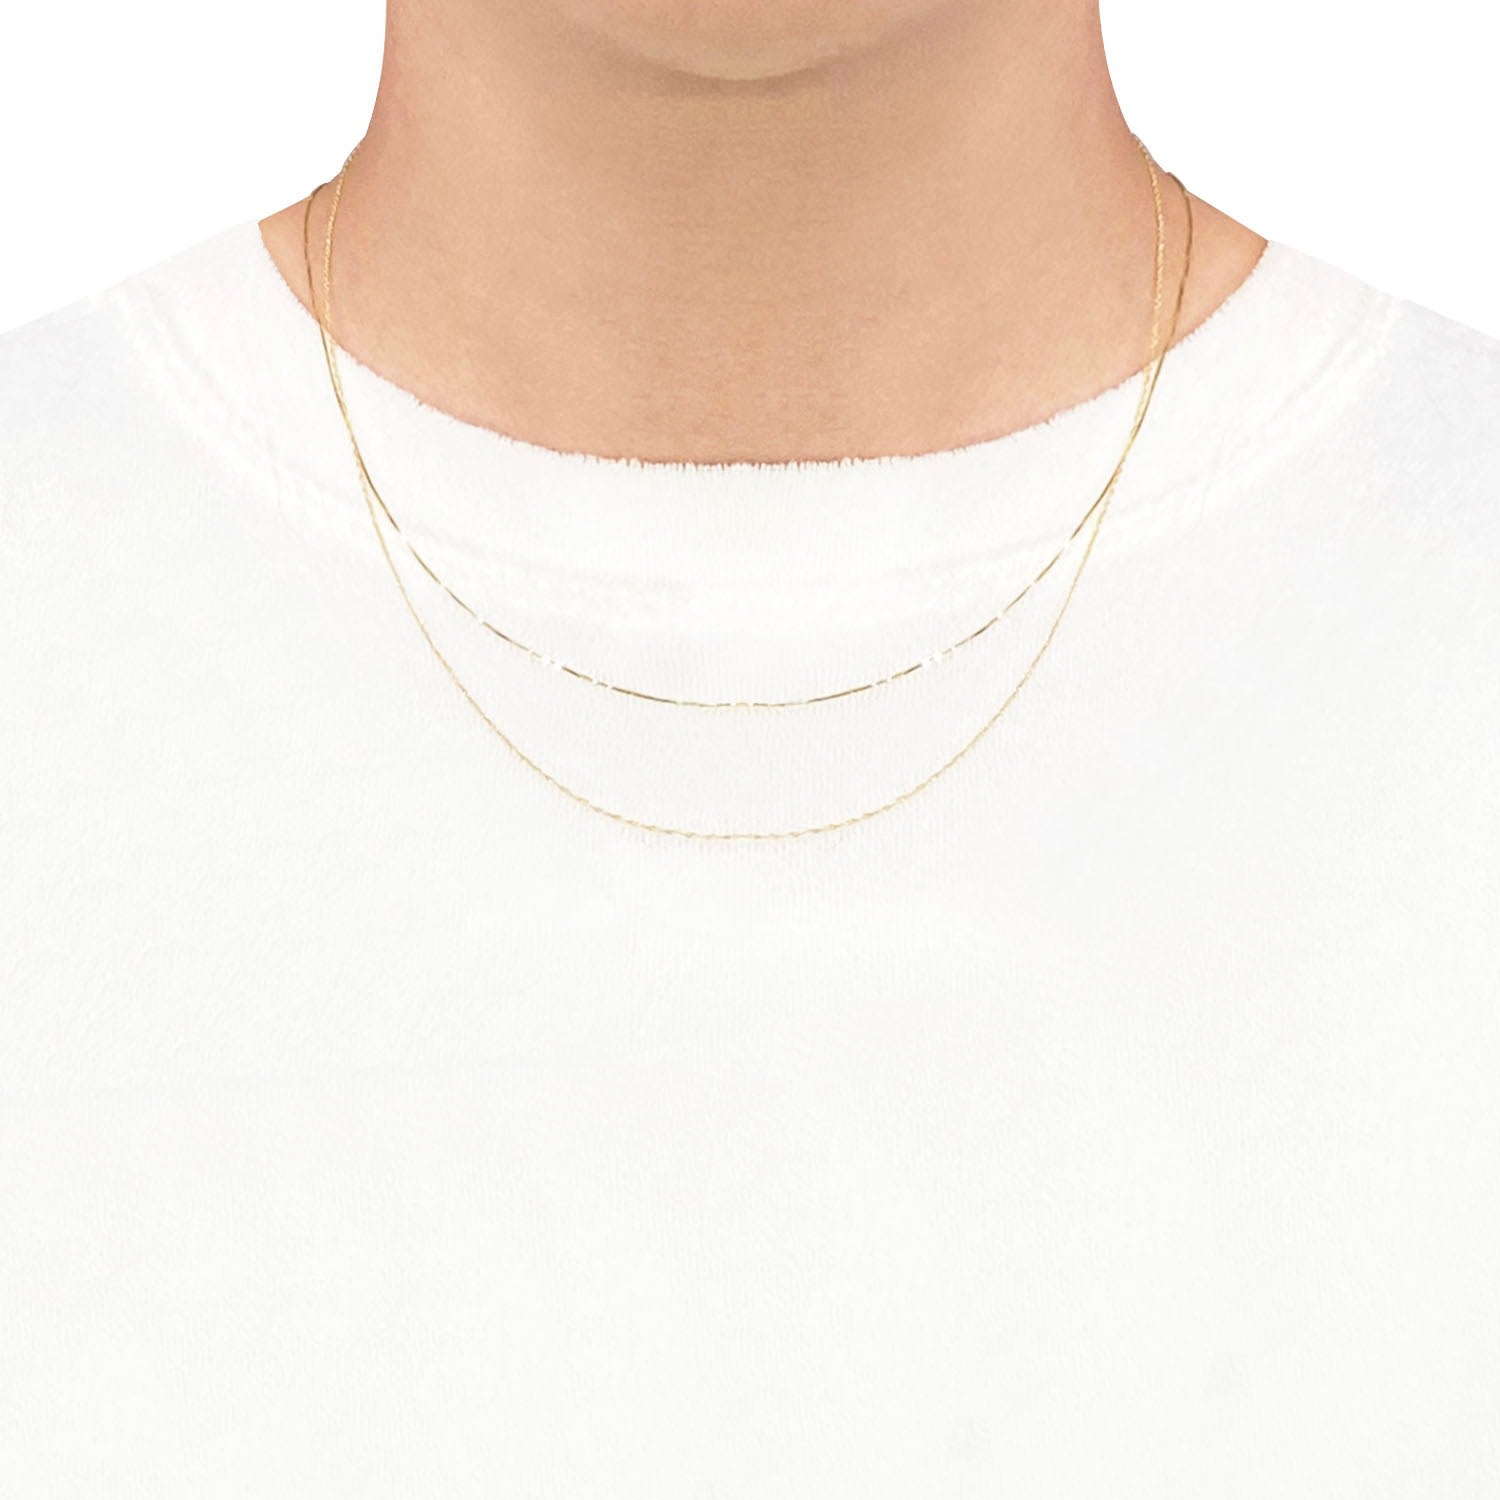 Men's 14K Gold 080 Box Chain Necklace Choker Undefined Jewelry